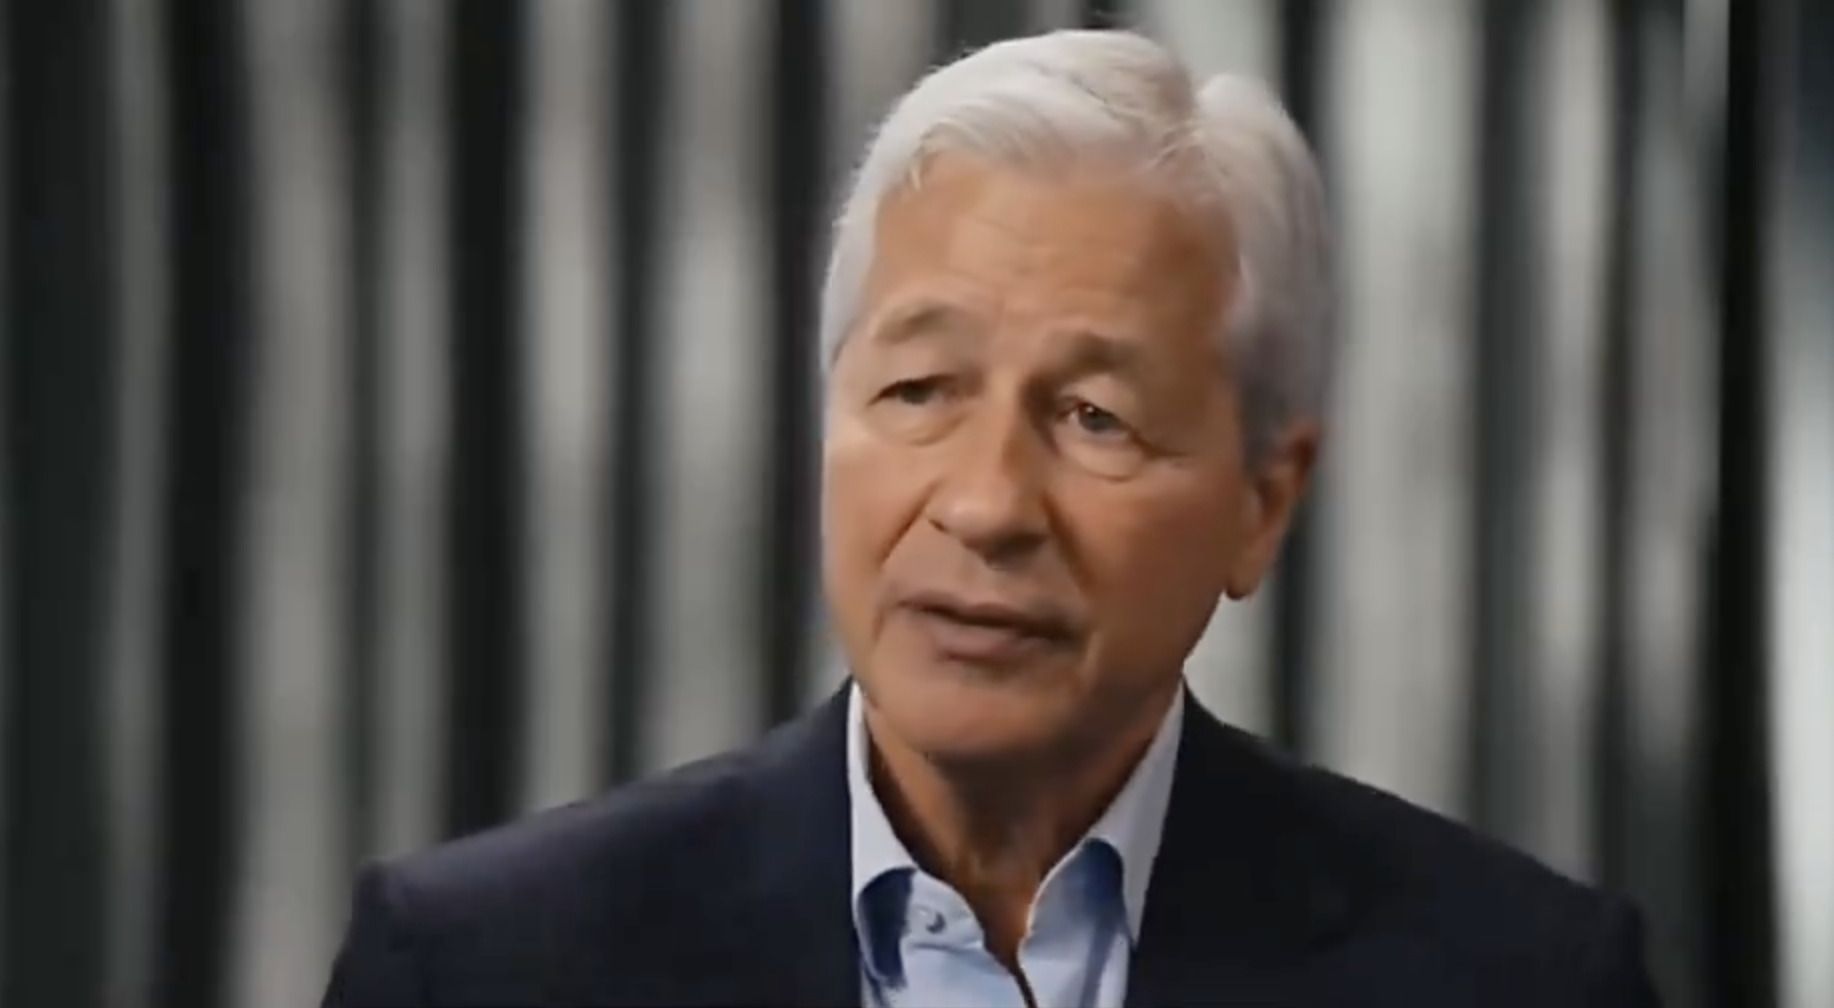 Jamie Dimon (JP Morgan) Preparing For “Things To Go Terribly Wrong”